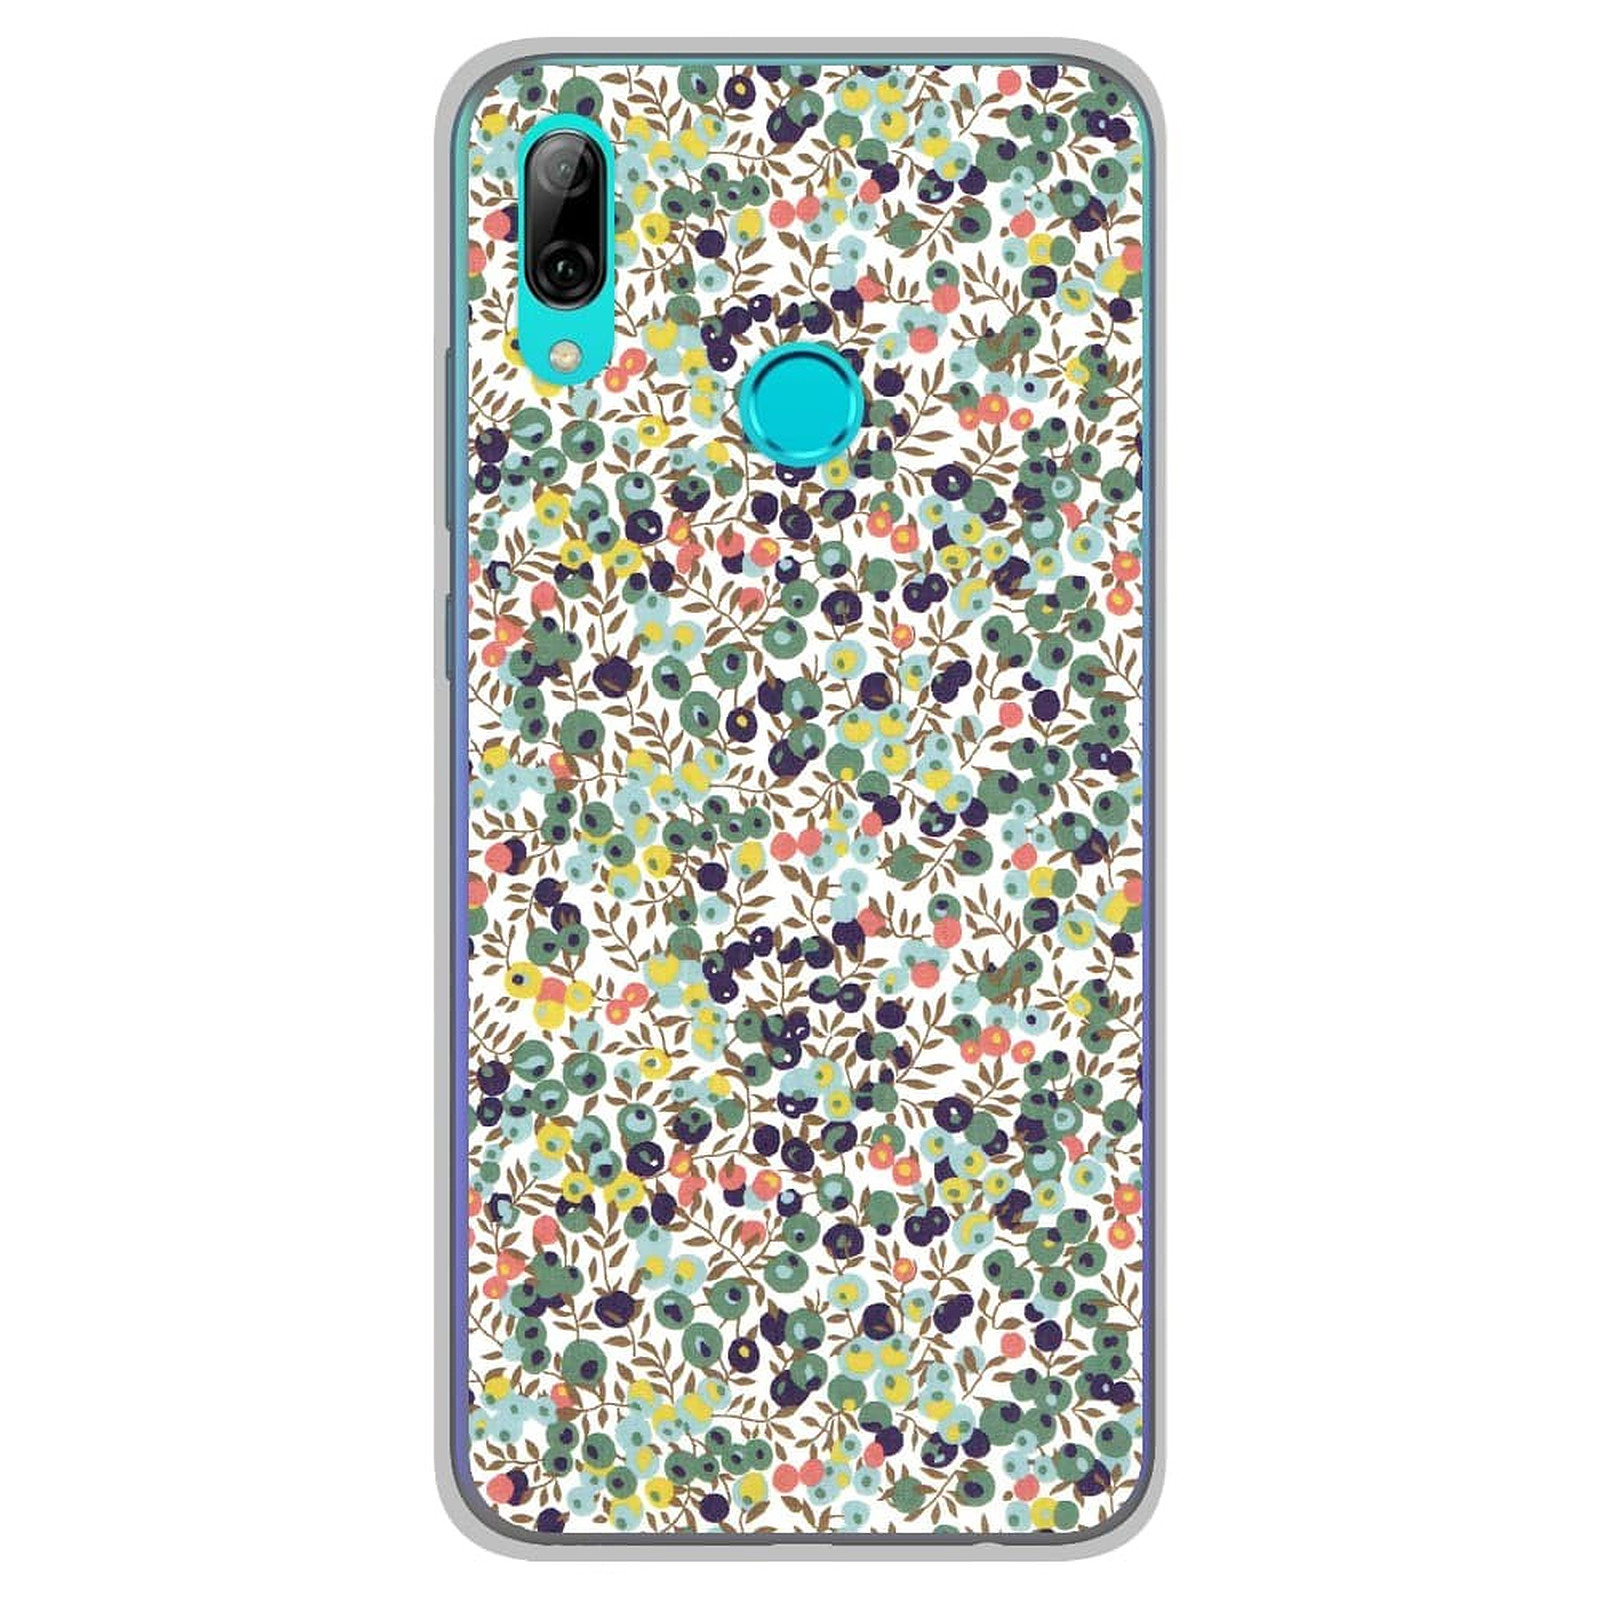 1001 Coques Coque silicone gel Huawei P Smart 2019 motif Liberty Wiltshire Vert - Coque telephone 1001Coques